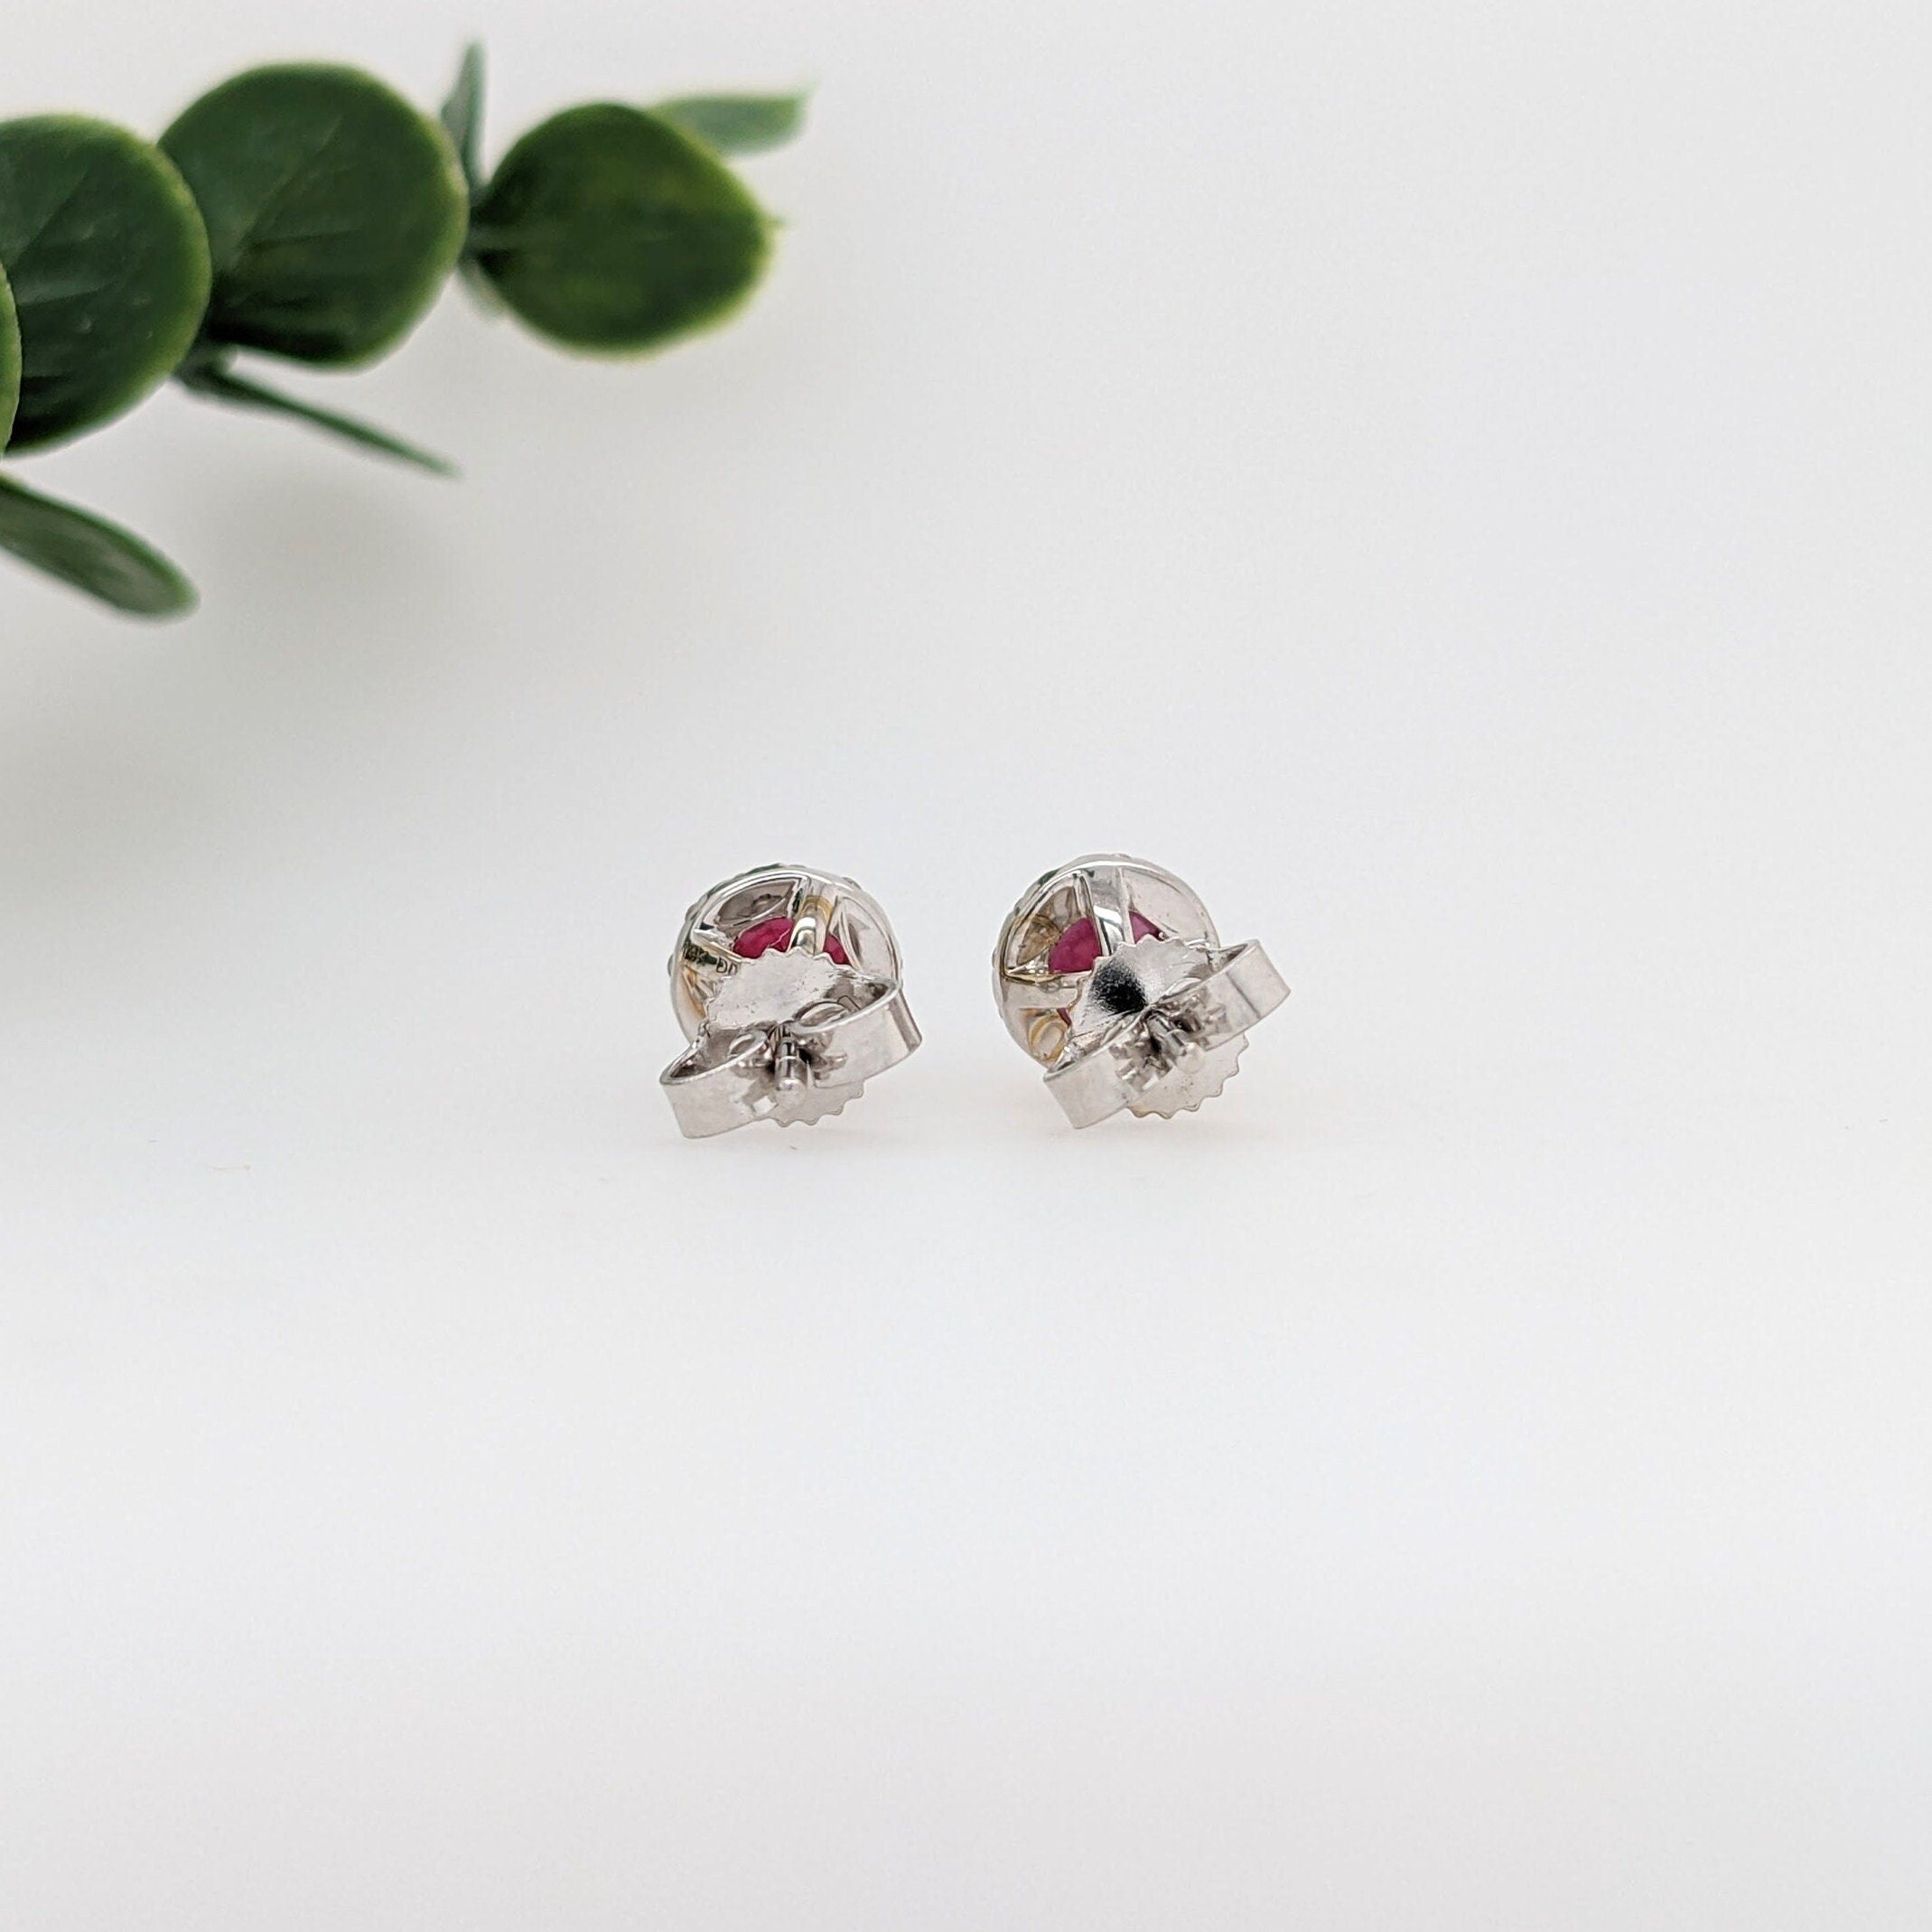 Stud Earrings-Pretty Mozambique Ruby Studs in Solid 14K White Gold with Natural Diamond Accents | Gemstone Earrings | Classic | Elegant | July Birthstone - NNJGemstones